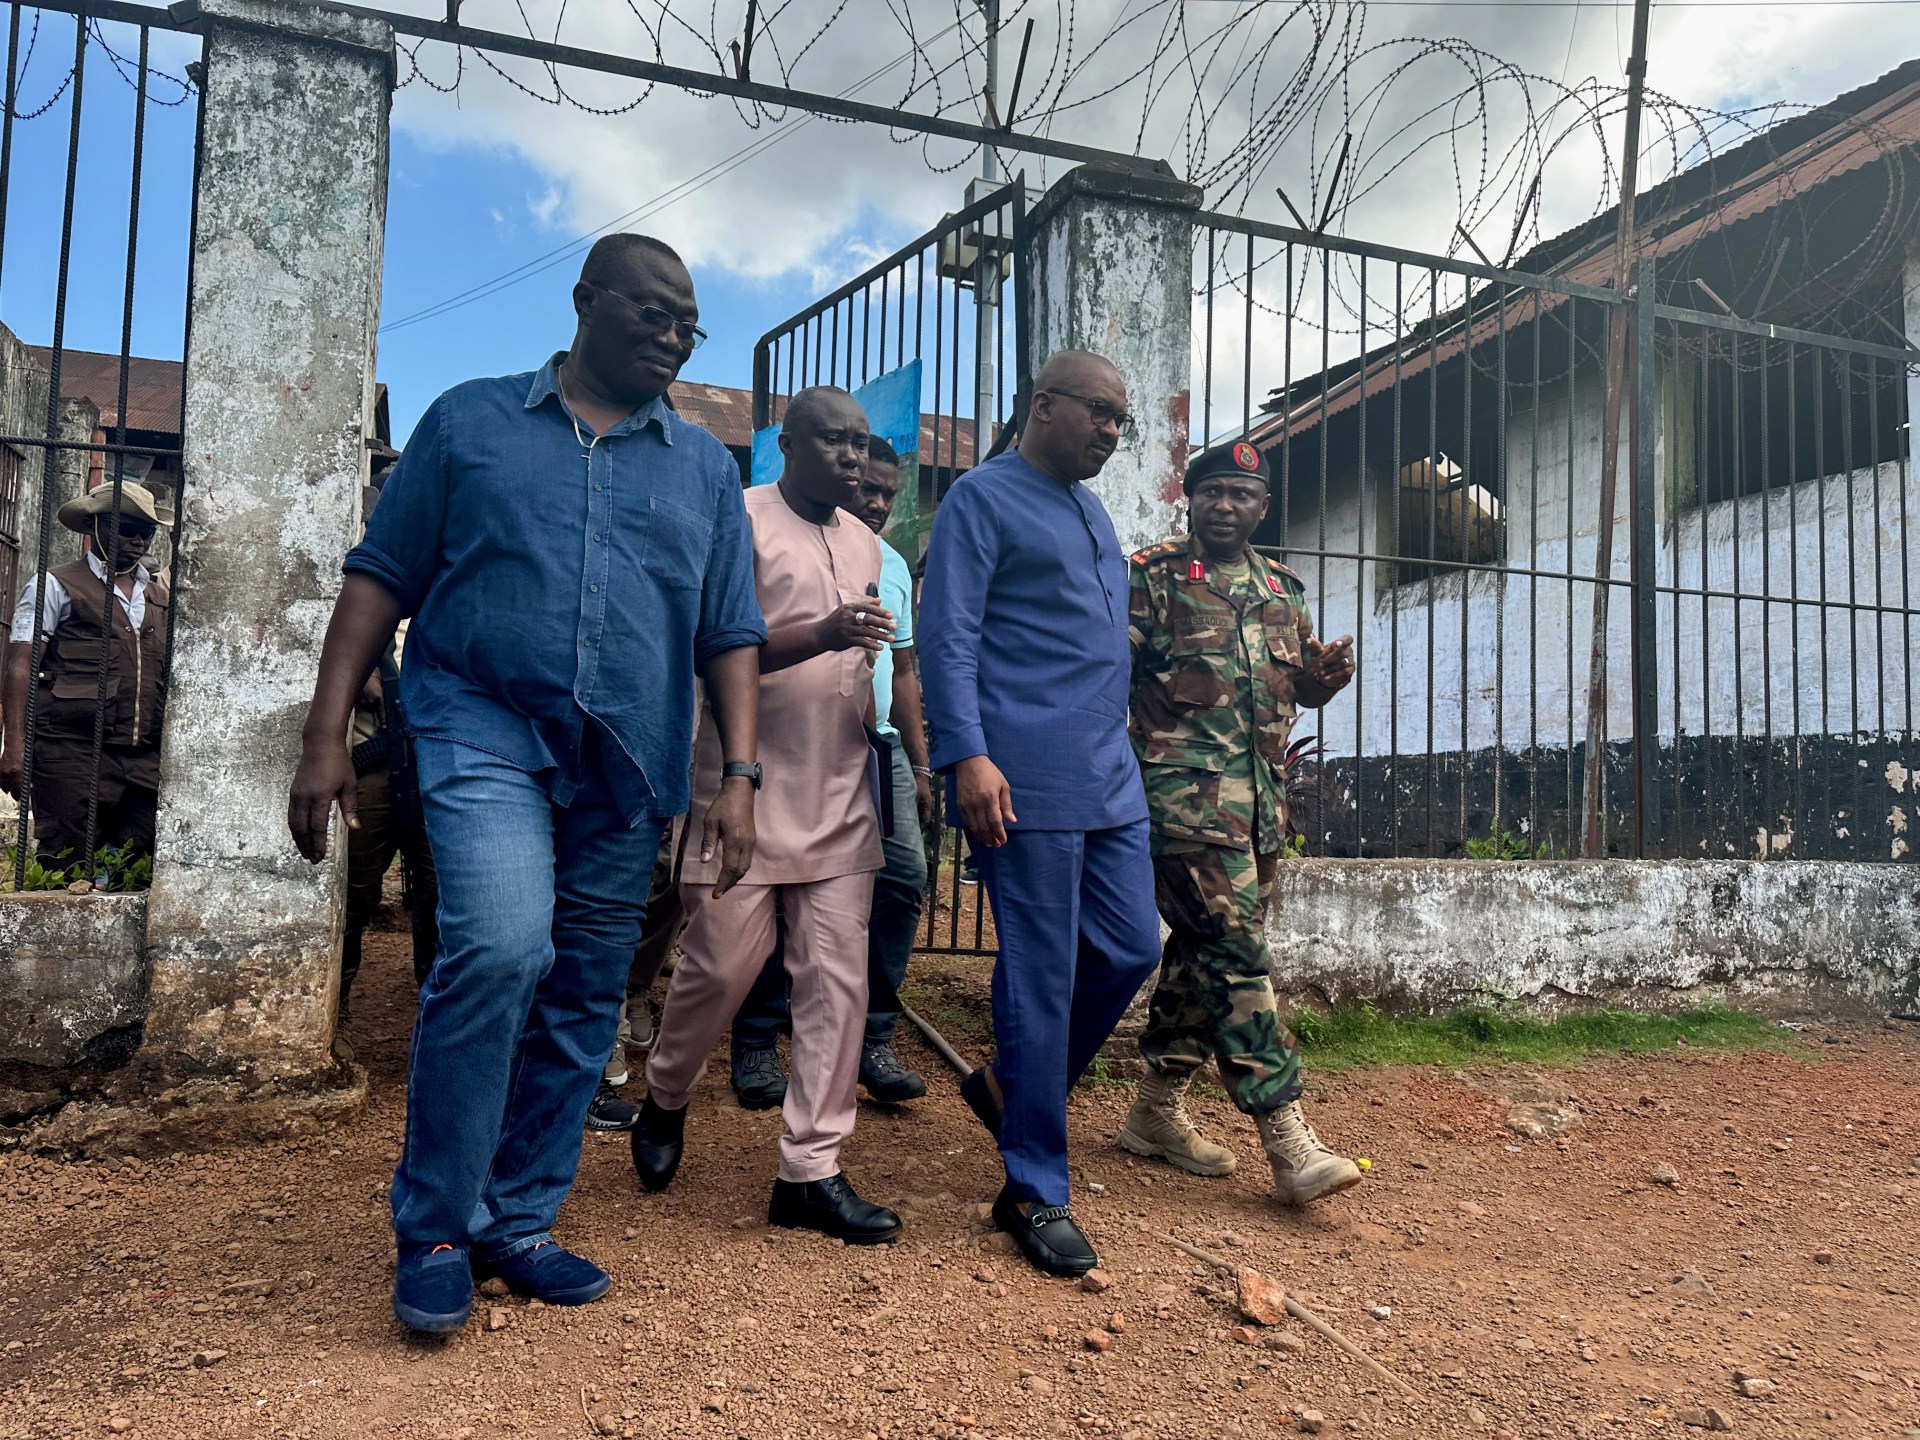 Sierra Leone attacks were a failed coup attempt, officials say | Conflict News #Sierra #Leone #attacks #failed #coup #attempt #officials #Conflict #News